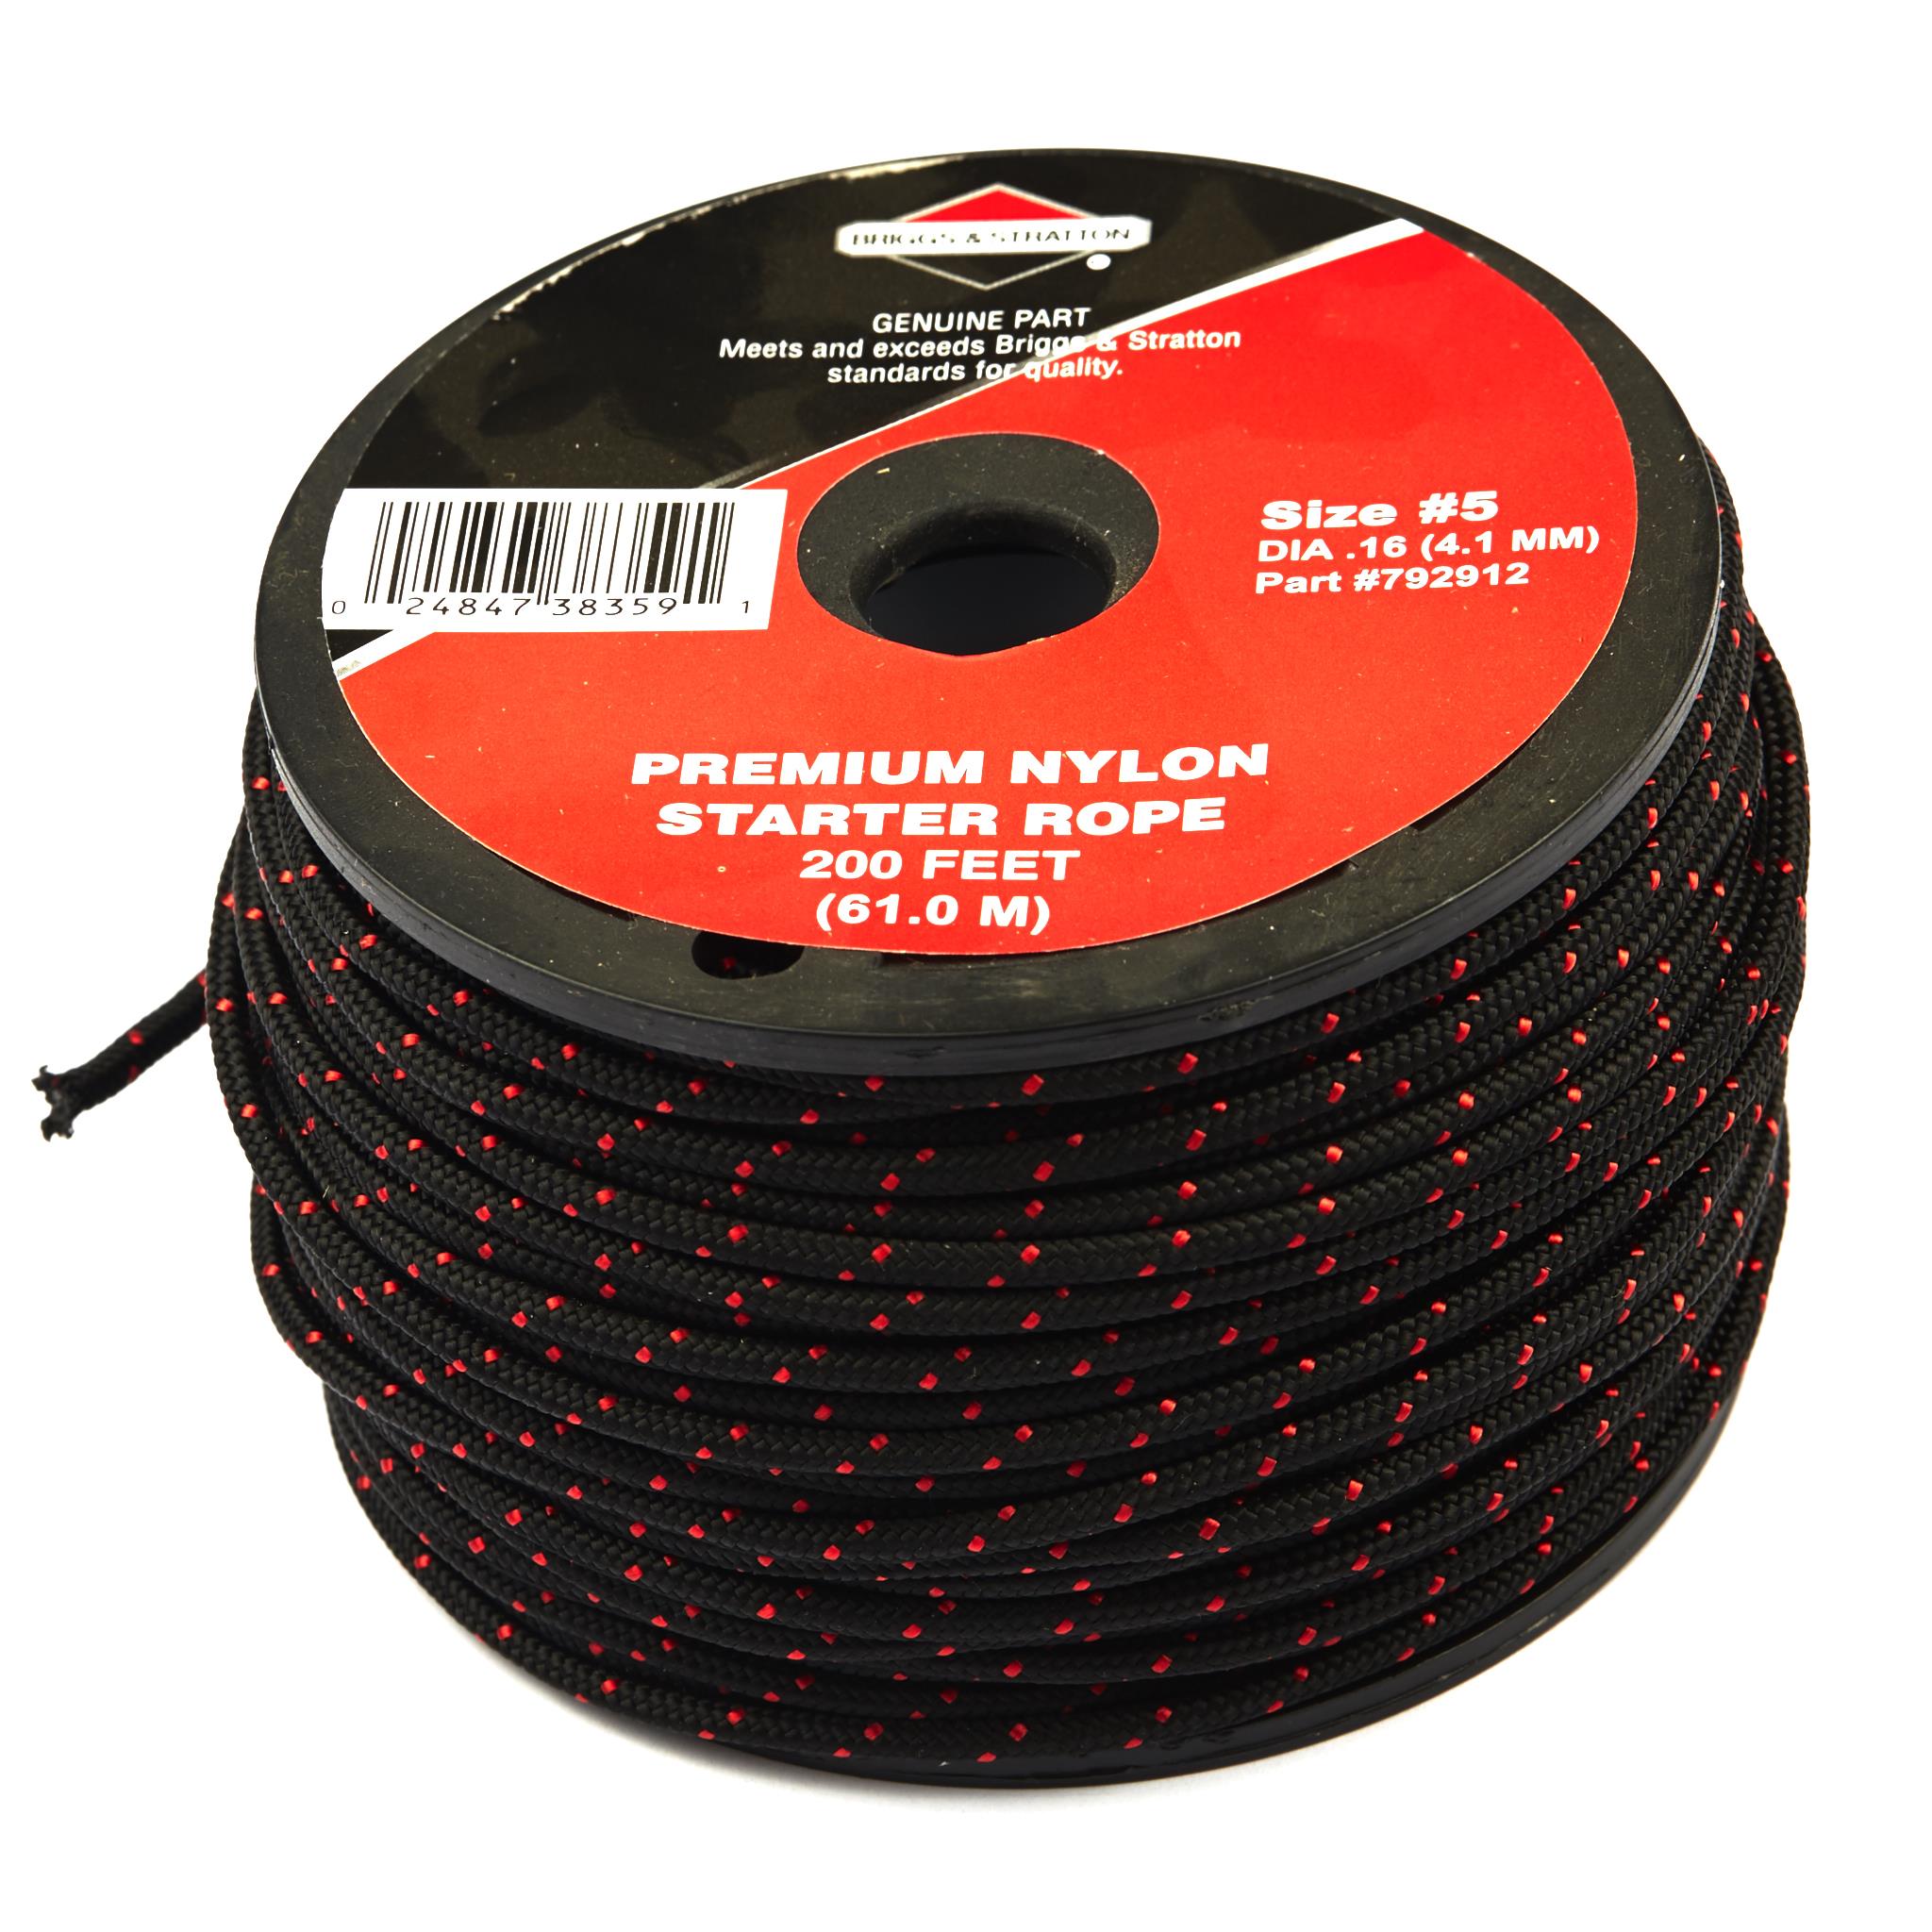 ROPE BULK 5 200 FT part# 792912 by Briggs & Stratton